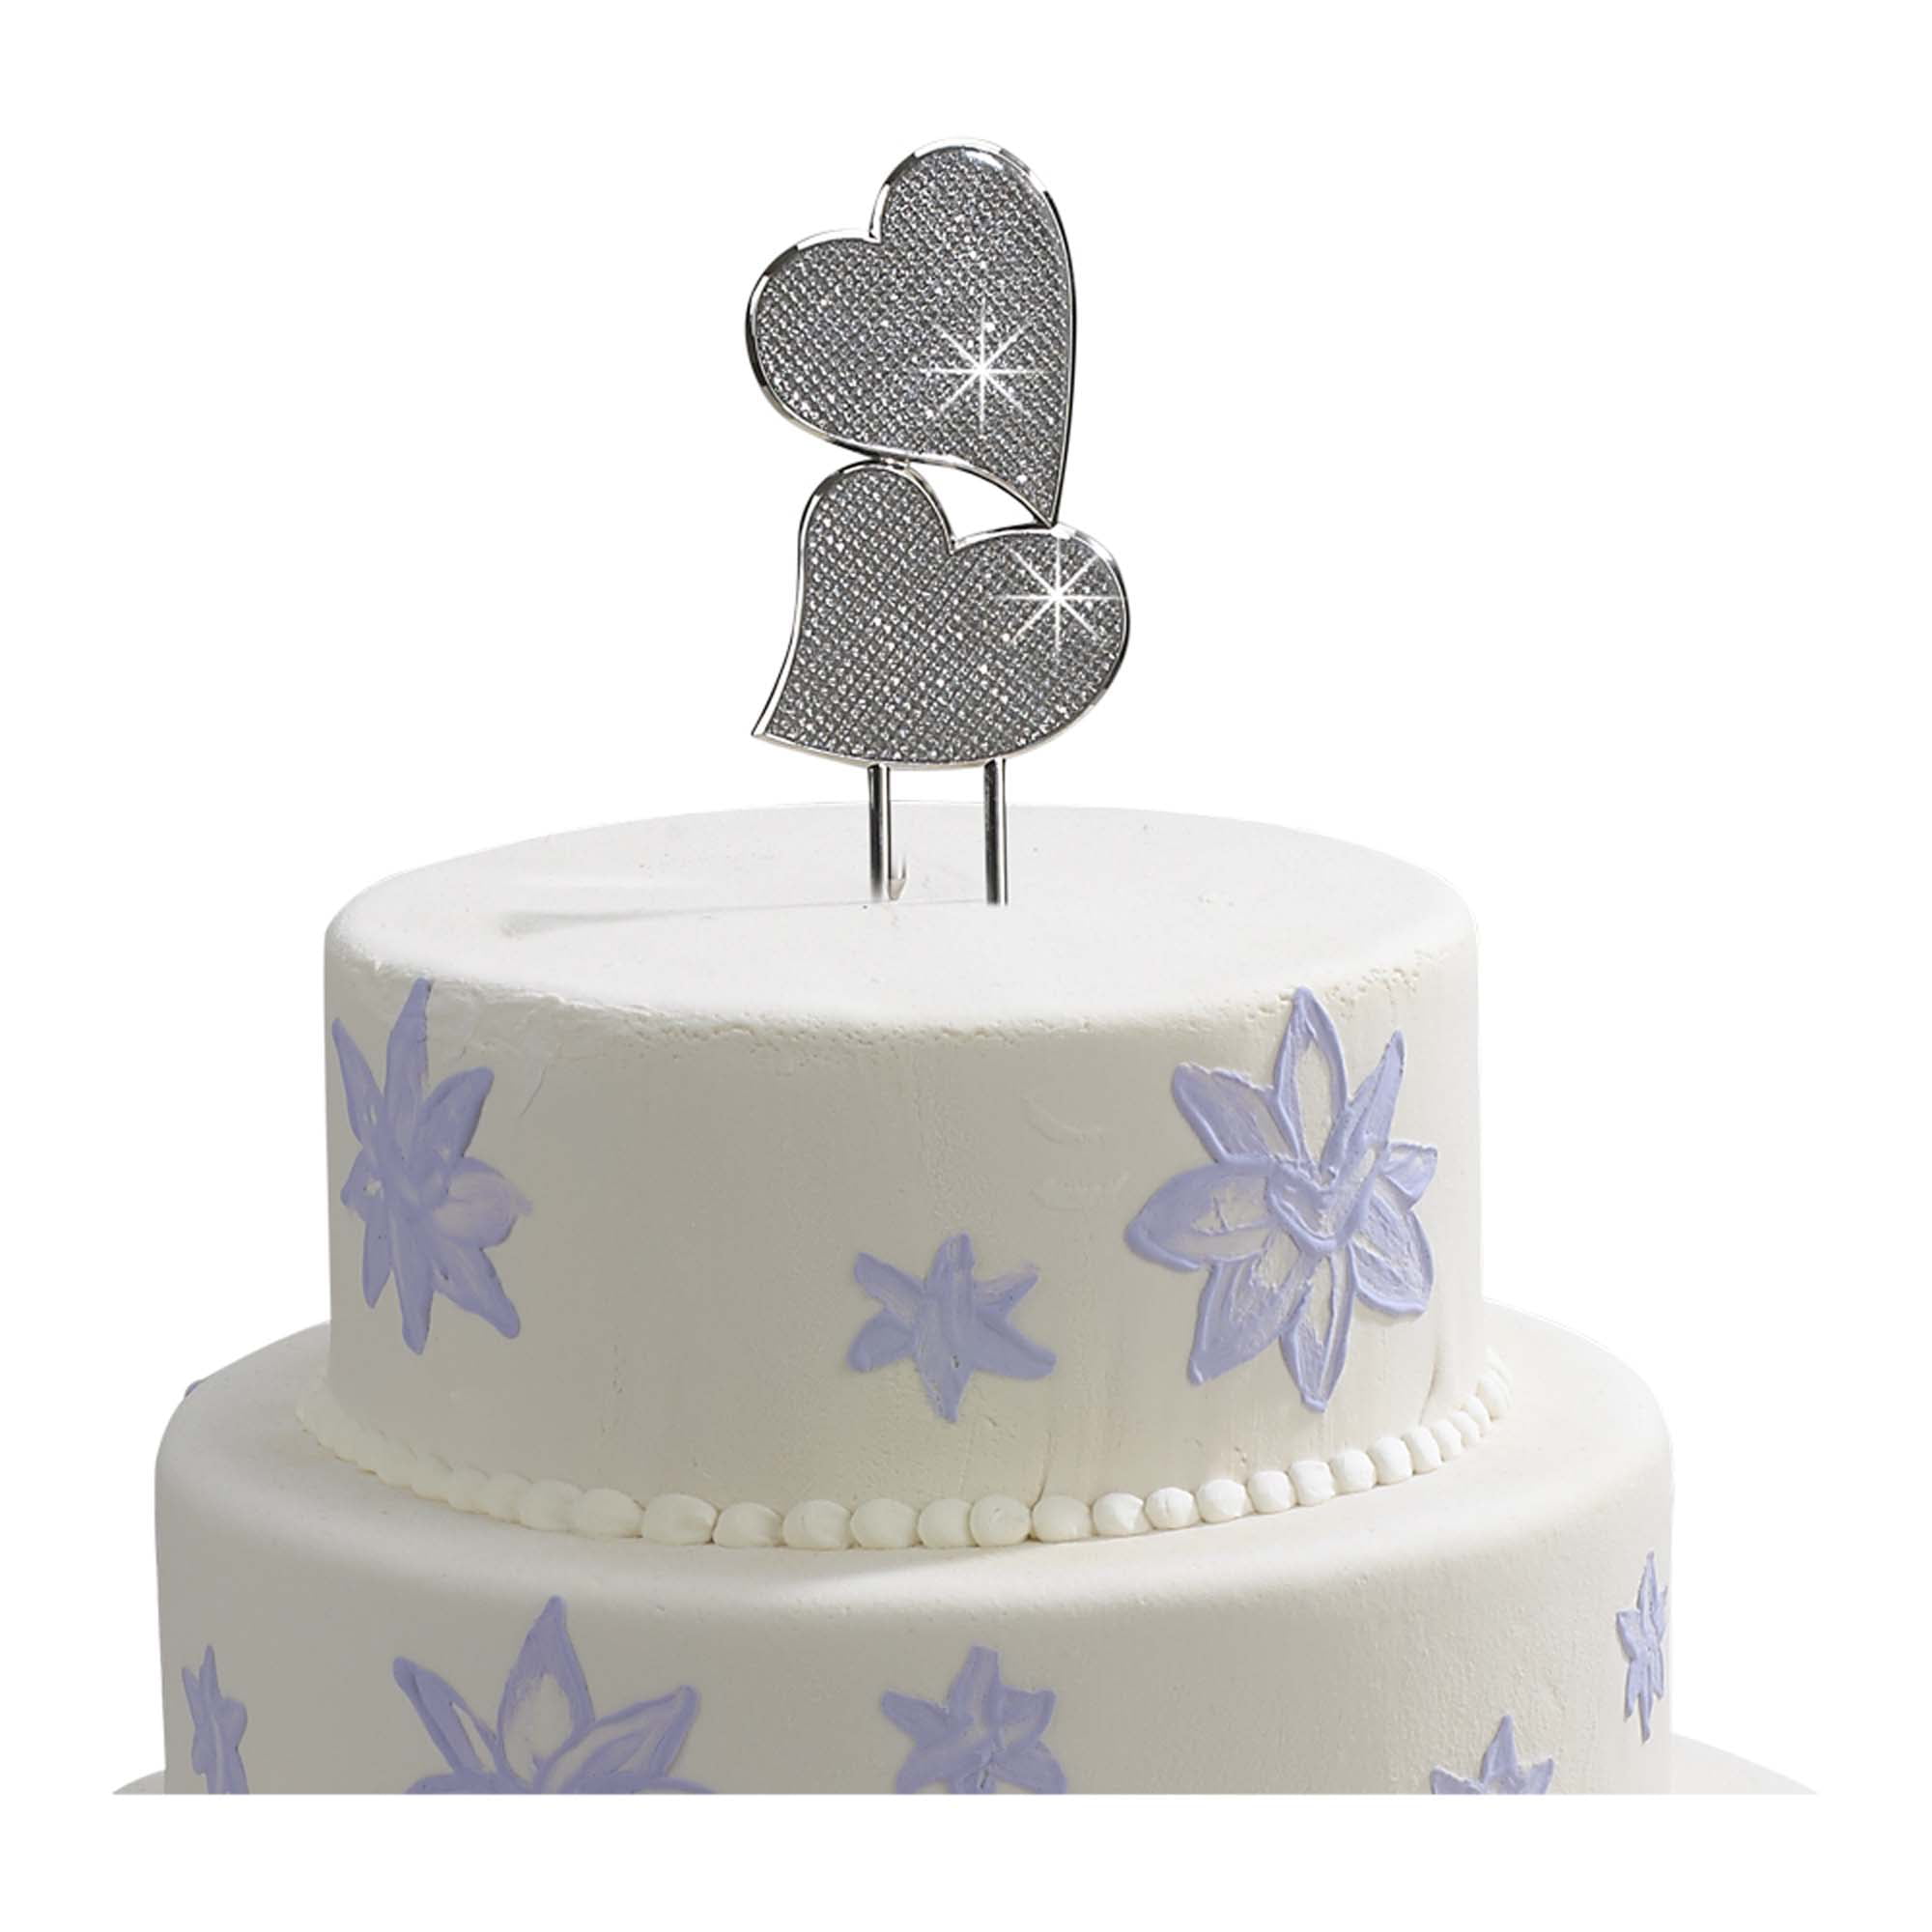 Picture of Creative Gifts International 003930 7 in. Glitter Galore Double Heart Cake Topper